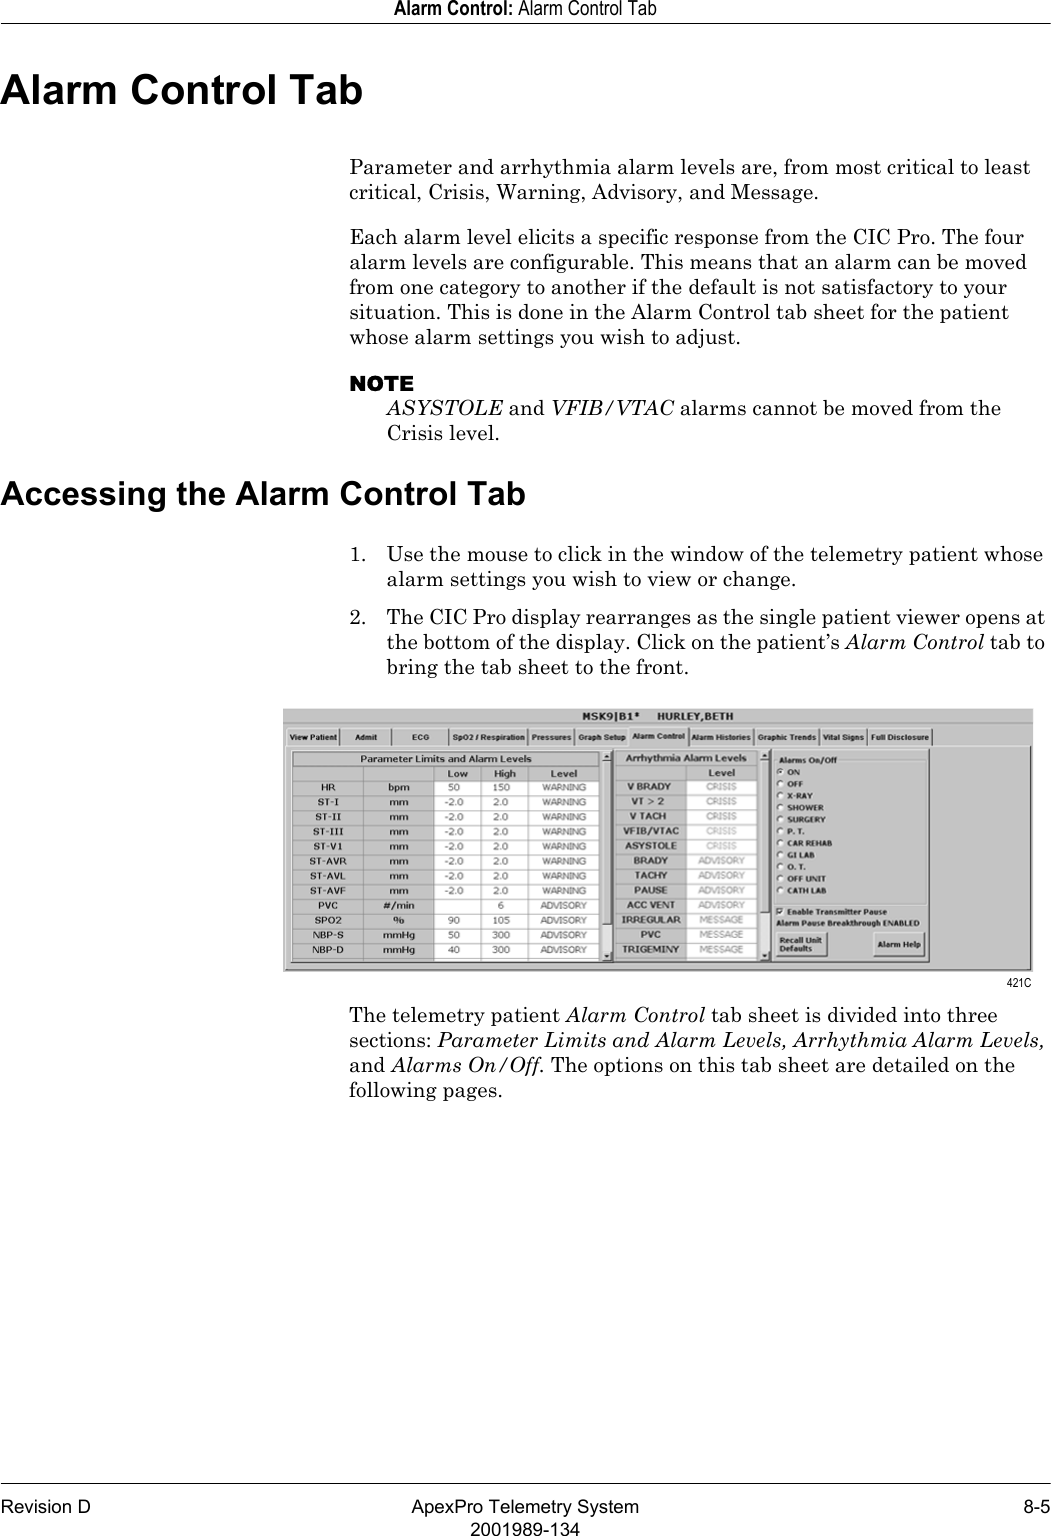 Revision D ApexPro Telemetry System 8-52001989-134Alarm Control: Alarm Control TabAlarm Control TabParameter and arrhythmia alarm levels are, from most critical to least critical, Crisis, Warning, Advisory, and Message.Each alarm level elicits a specific response from the CIC Pro. The four alarm levels are configurable. This means that an alarm can be moved from one category to another if the default is not satisfactory to your situation. This is done in the Alarm Control tab sheet for the patient whose alarm settings you wish to adjust.NOTEASYSTOLE and VFIB/VTAC alarms cannot be moved from the Crisis level.Accessing the Alarm Control Tab1. Use the mouse to click in the window of the telemetry patient whose alarm settings you wish to view or change.2. The CIC Pro display rearranges as the single patient viewer opens at the bottom of the display. Click on the patient’s Alarm Control tab to bring the tab sheet to the front.The telemetry patient Alarm Control tab sheet is divided into three sections: Parameter Limits and Alarm Levels, Arrhythmia Alarm Levels, and Alarms On/Off. The options on this tab sheet are detailed on the following pages. 421C